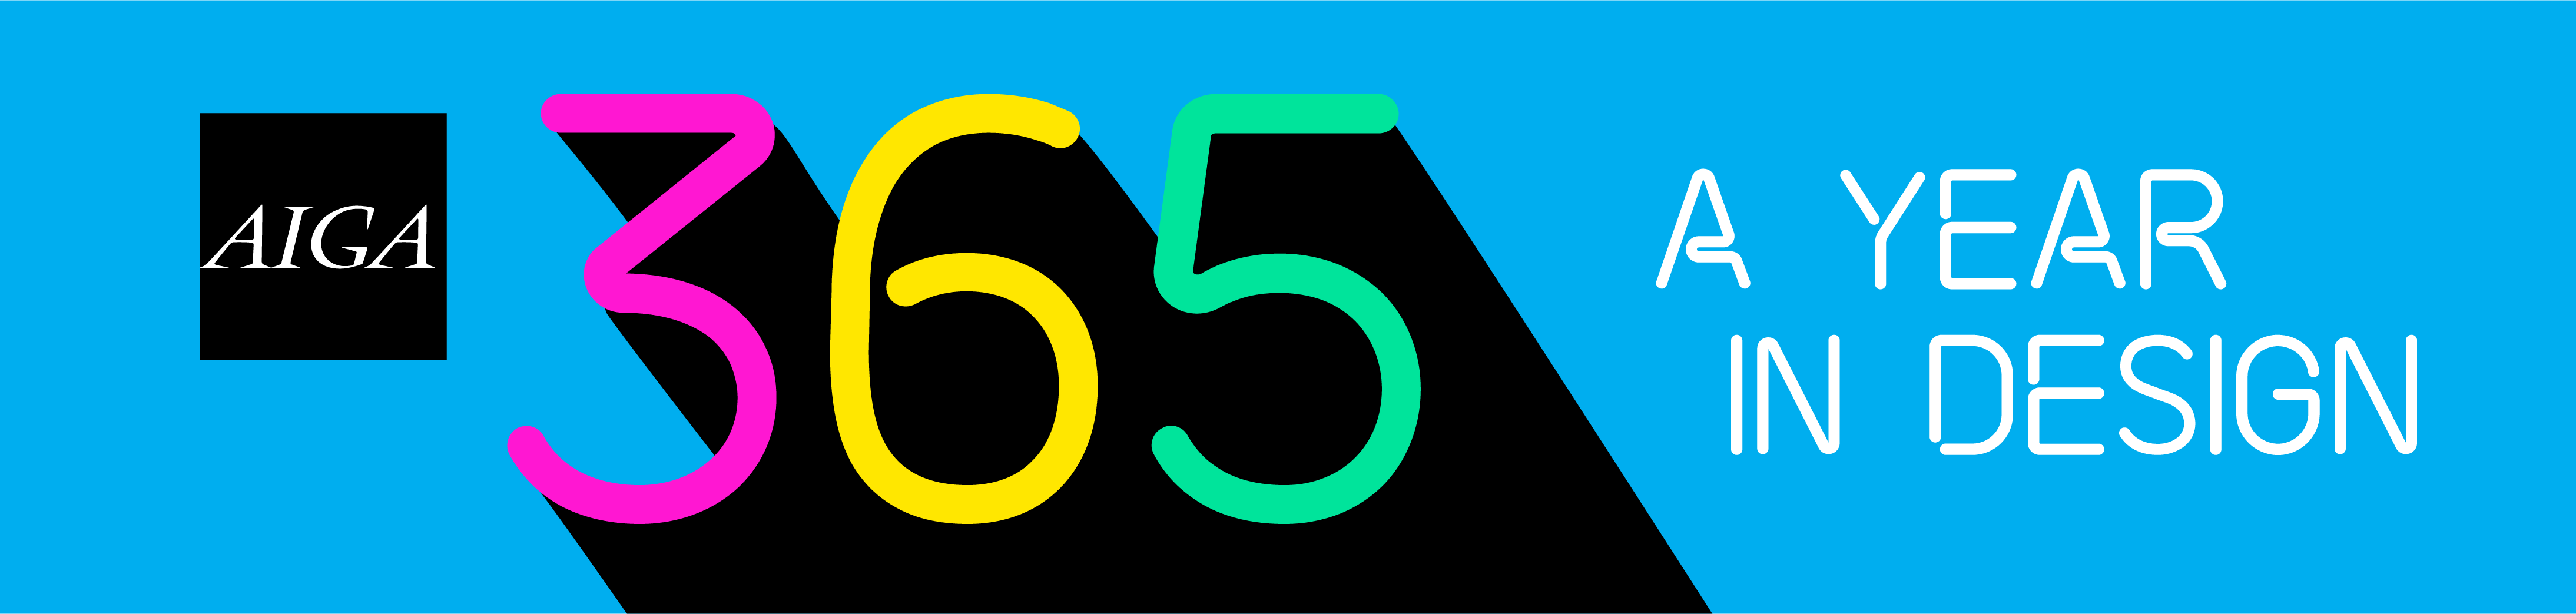 AIGA 365 Logo with text "365 A Year in Design"